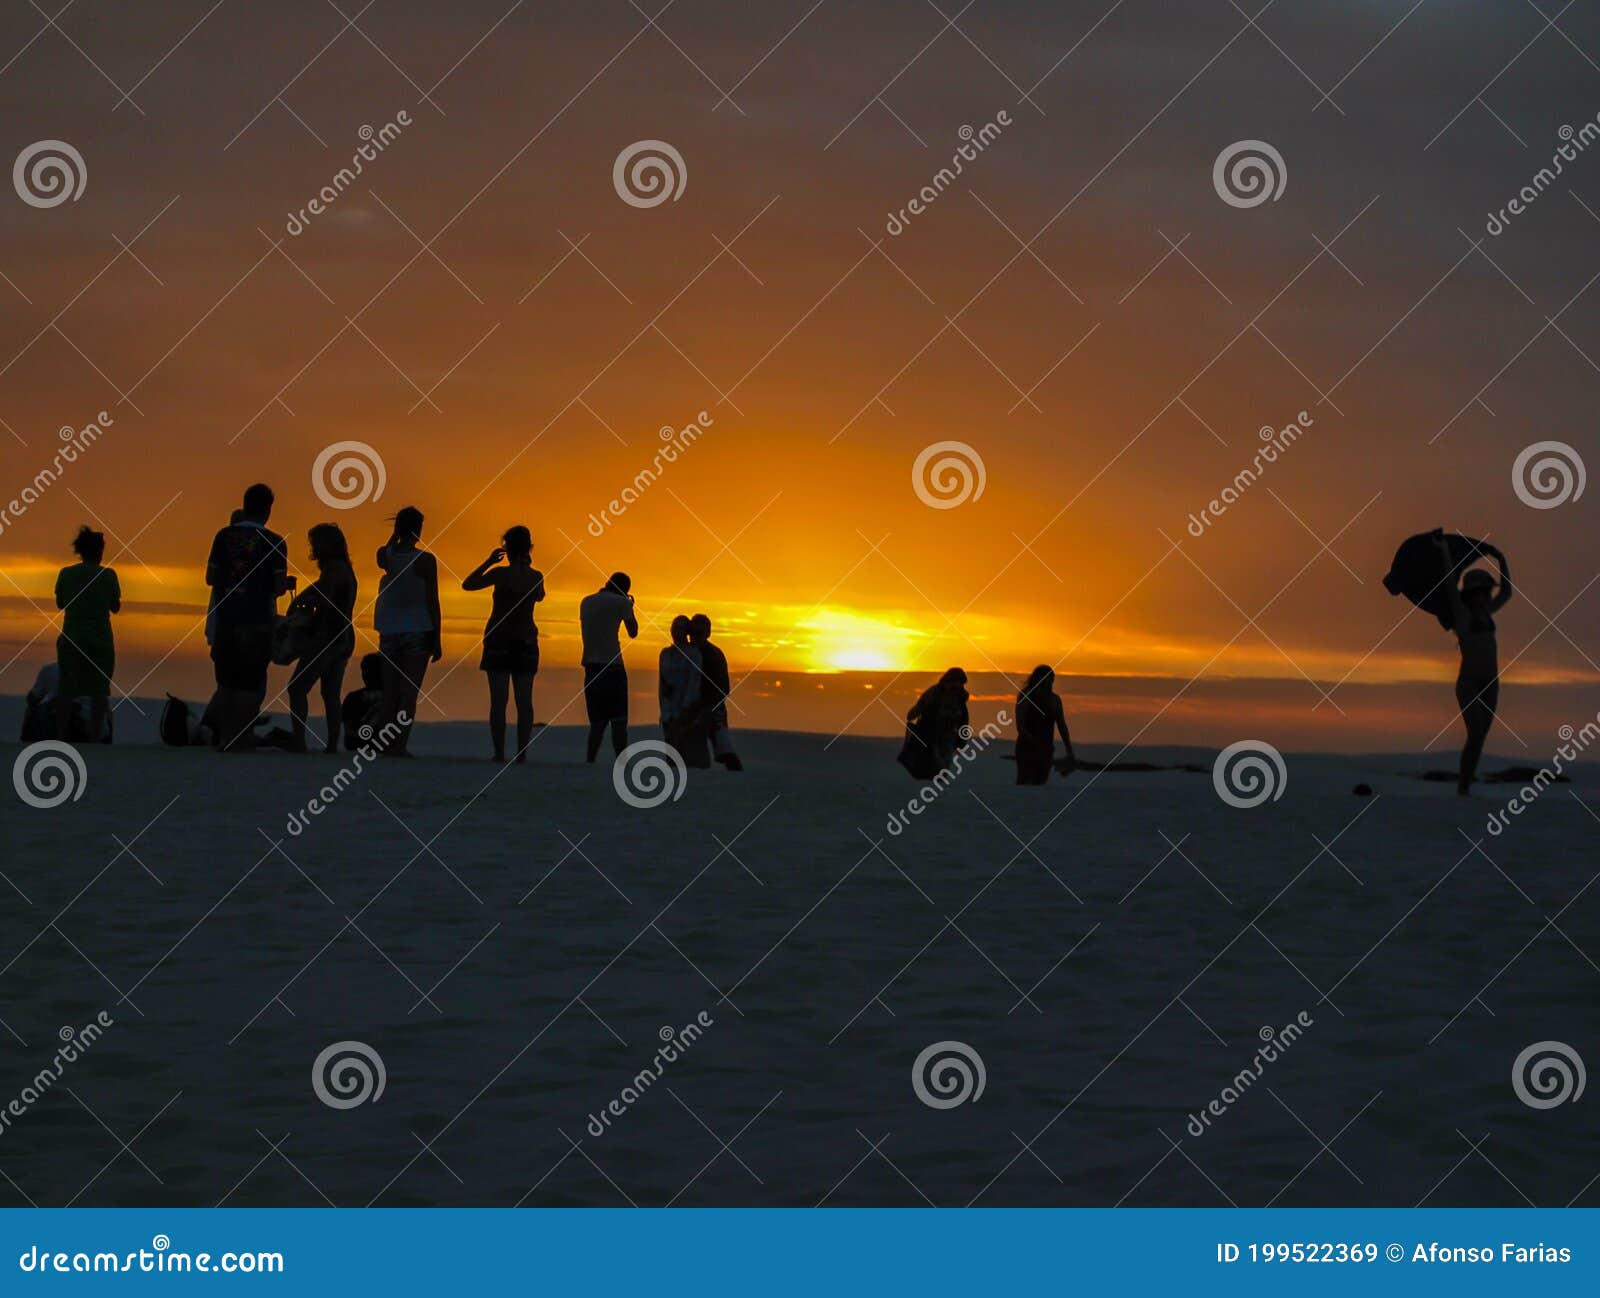 people silhouette with sunset, nature outdoor background